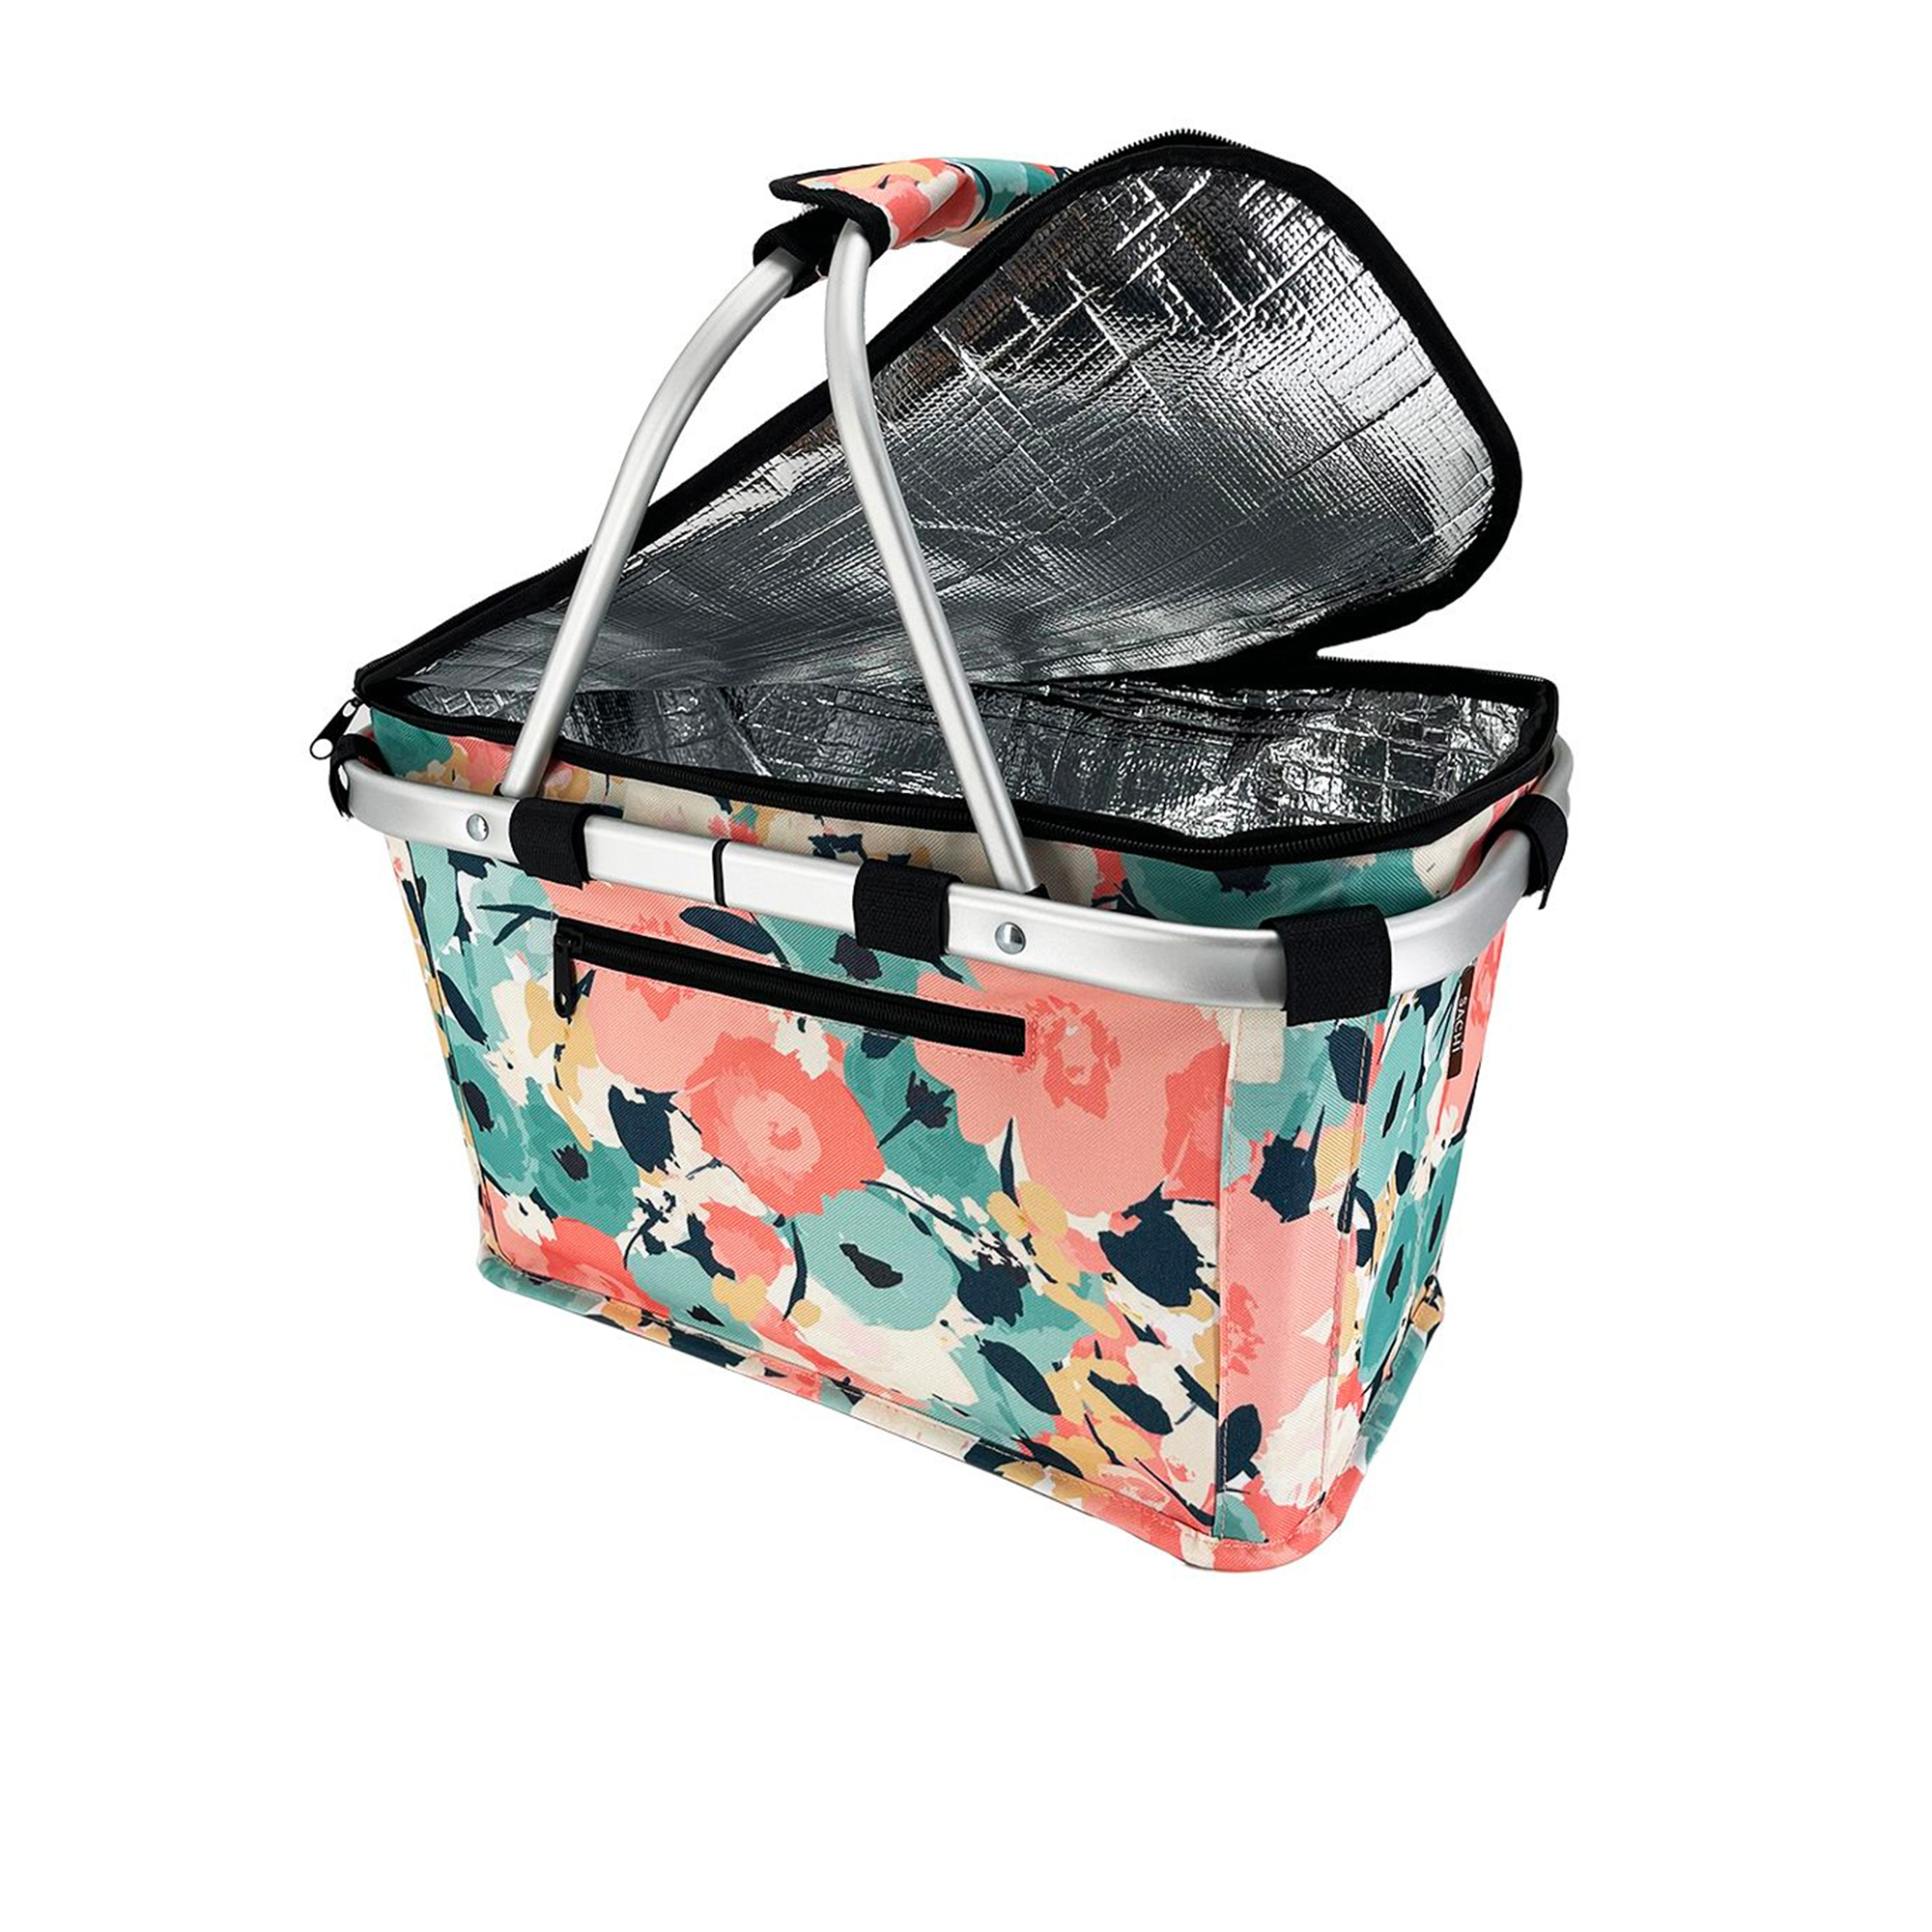 Sachi Insulated Carry Basket with Lid Pastel Blooms Image 1